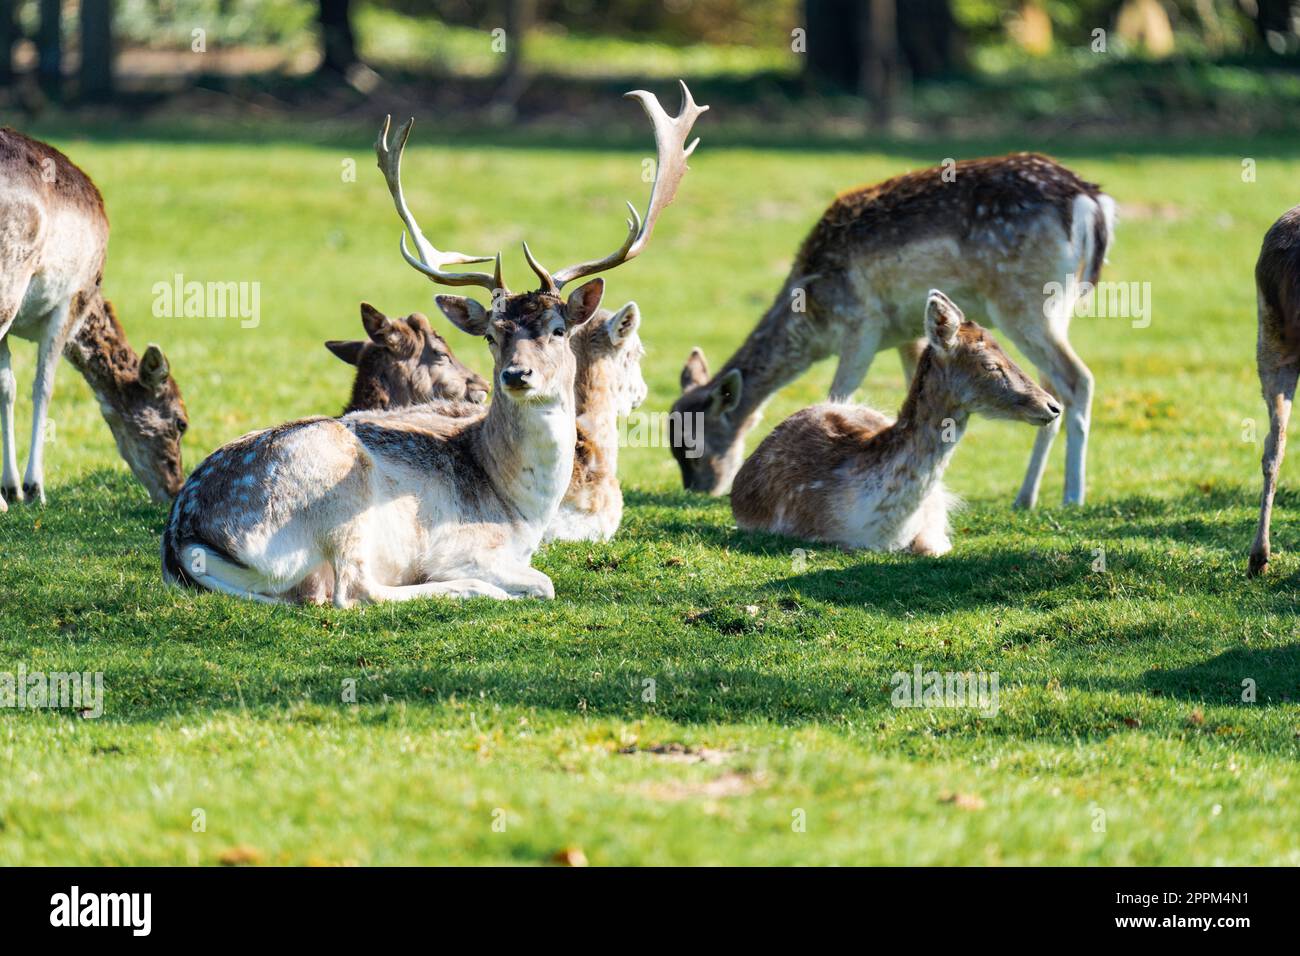 Male deer sitting on the grass surrounded by female deers on a sunny day Stock Photo